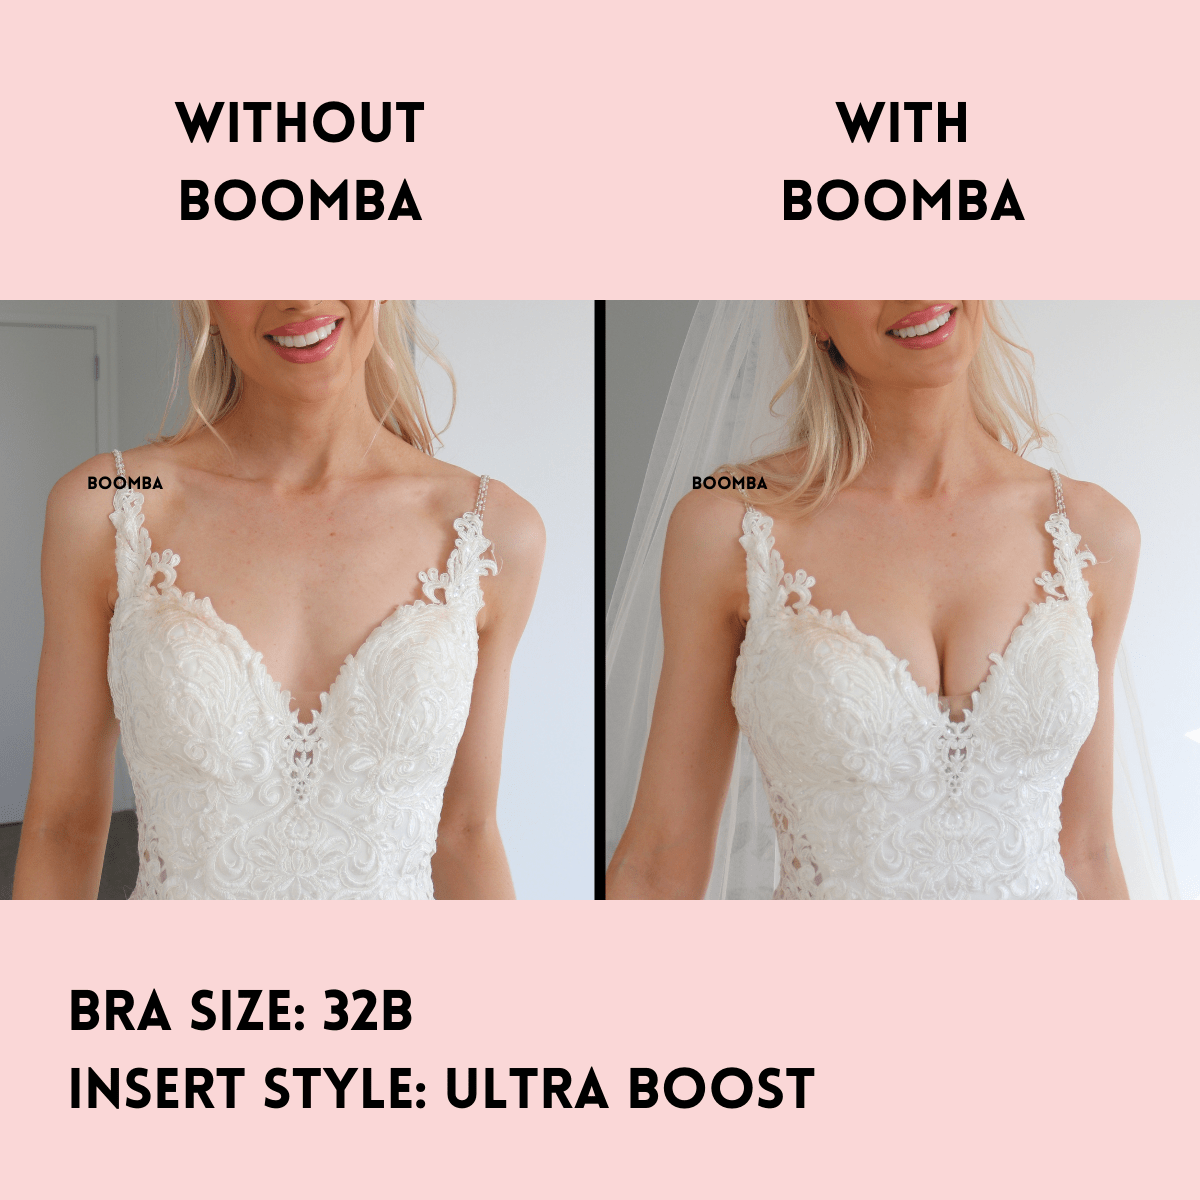 Best Bra Cups For Wedding Dress - Pictures of Wedding Dress and Lipstick